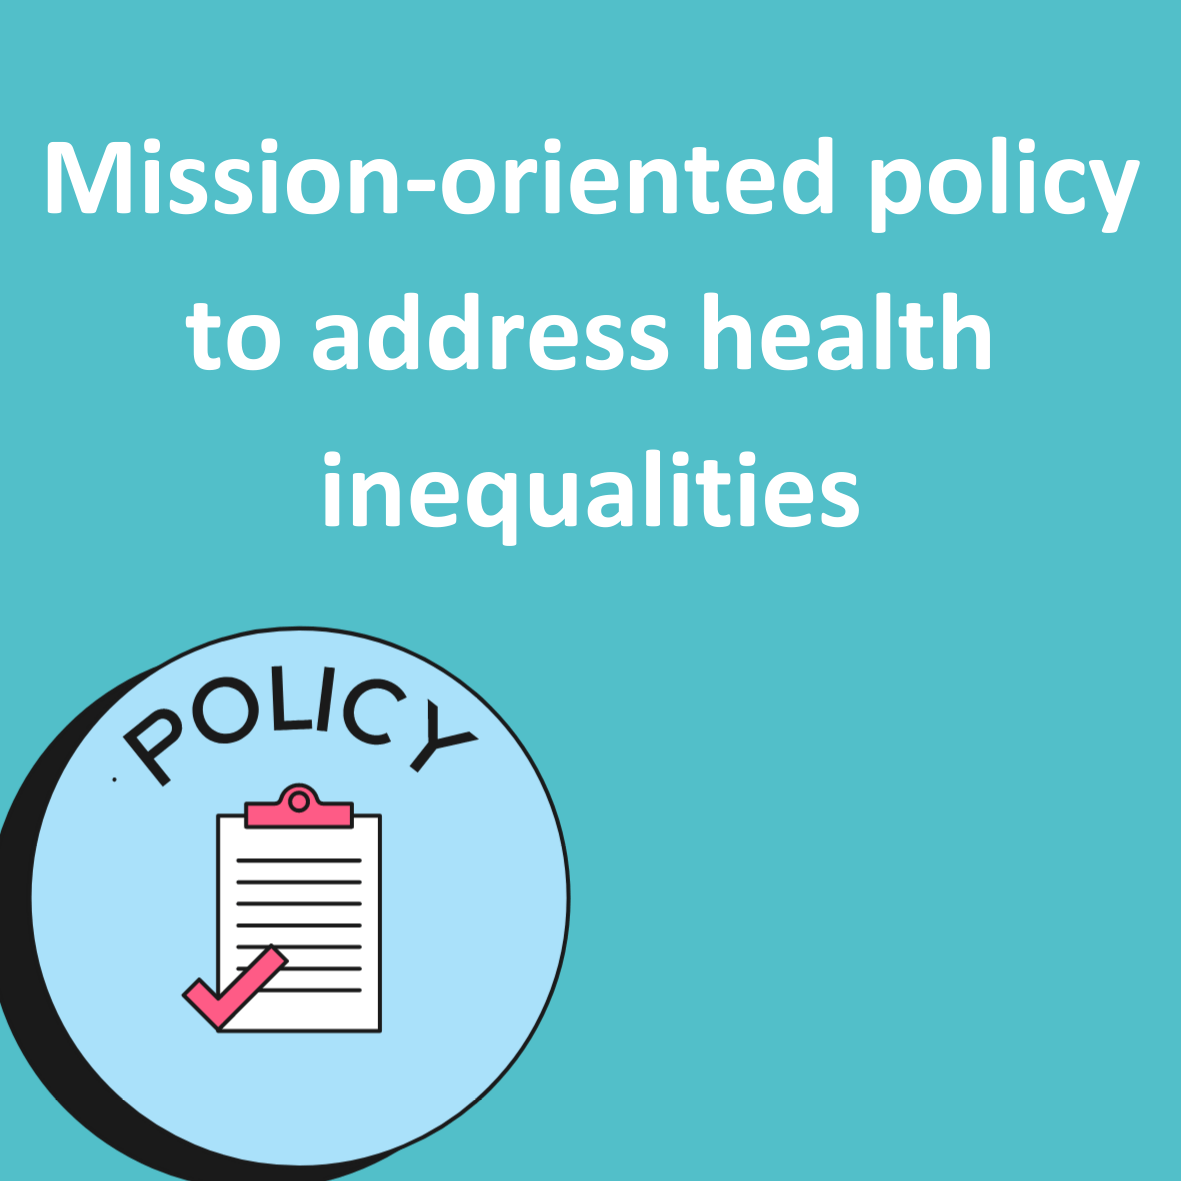 Mission-oriented policy to address health inequalities